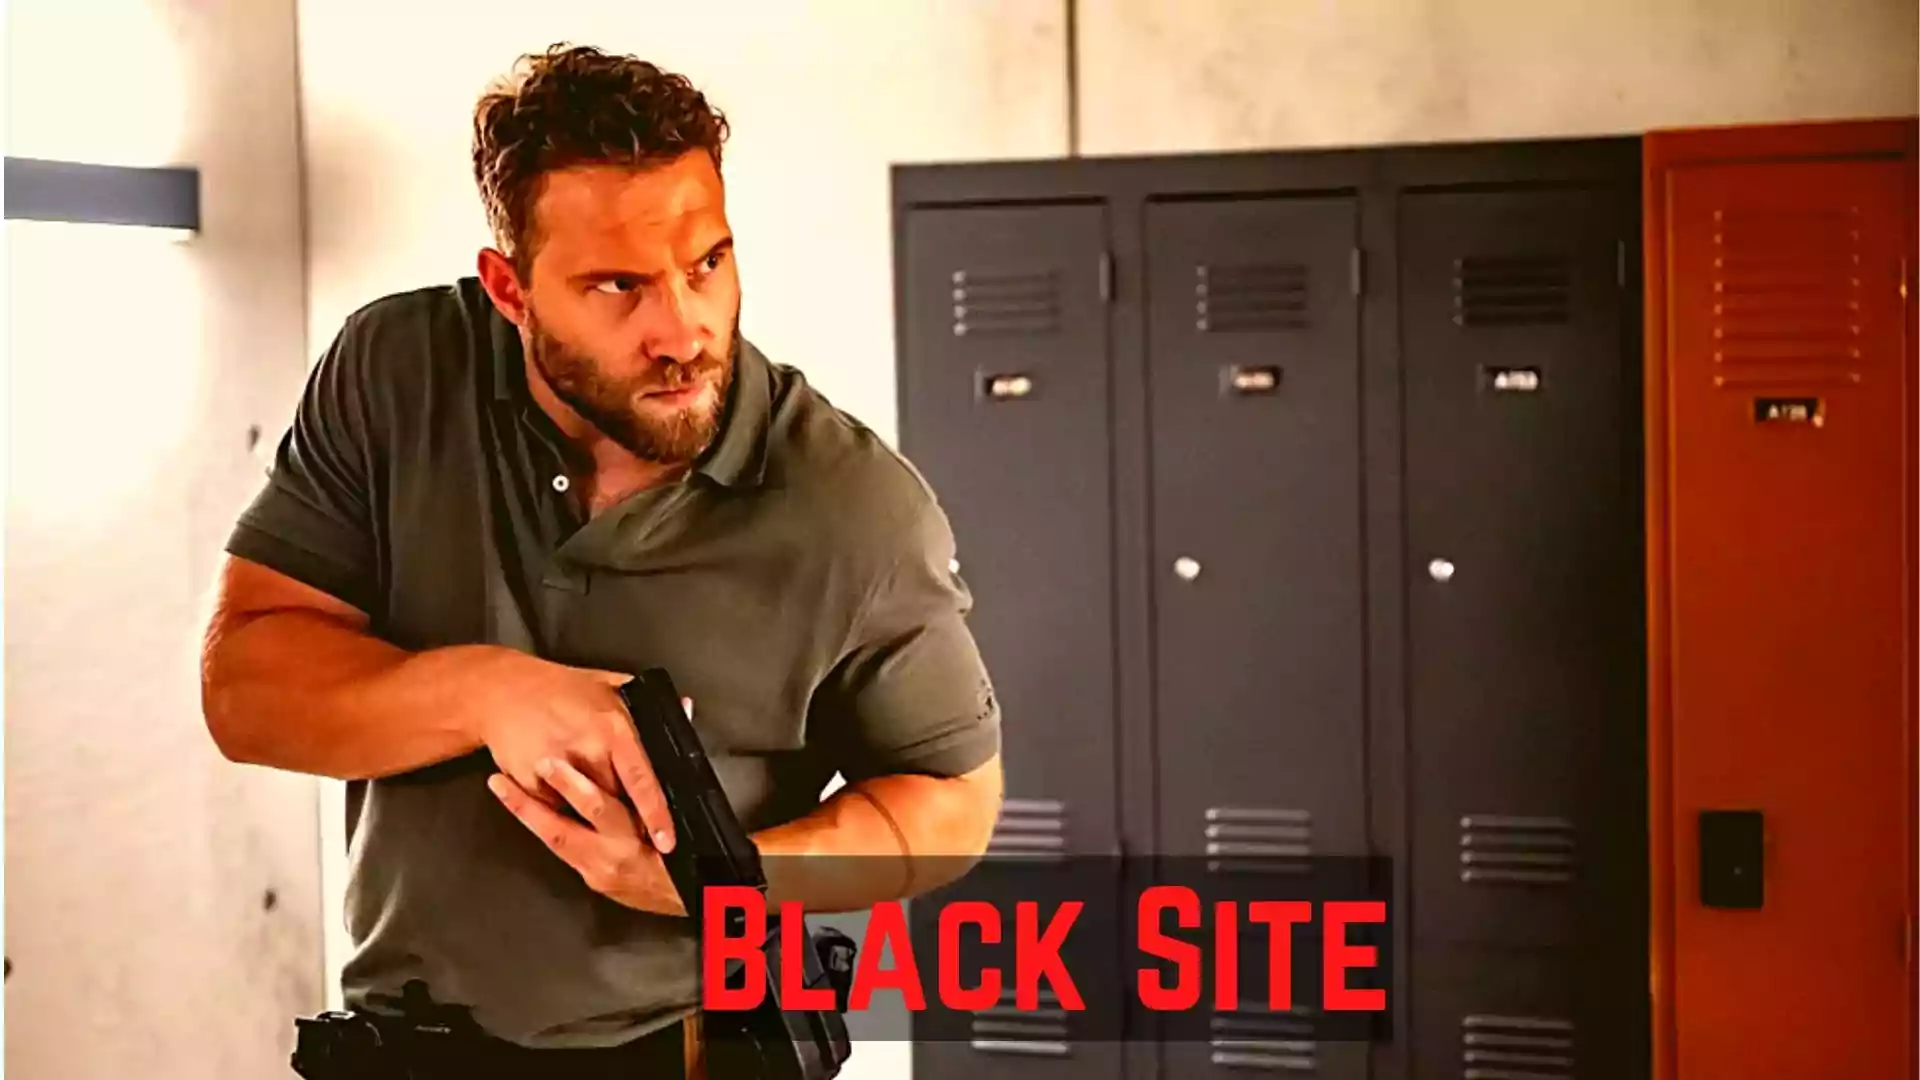 Black Site Wallpaper and Images